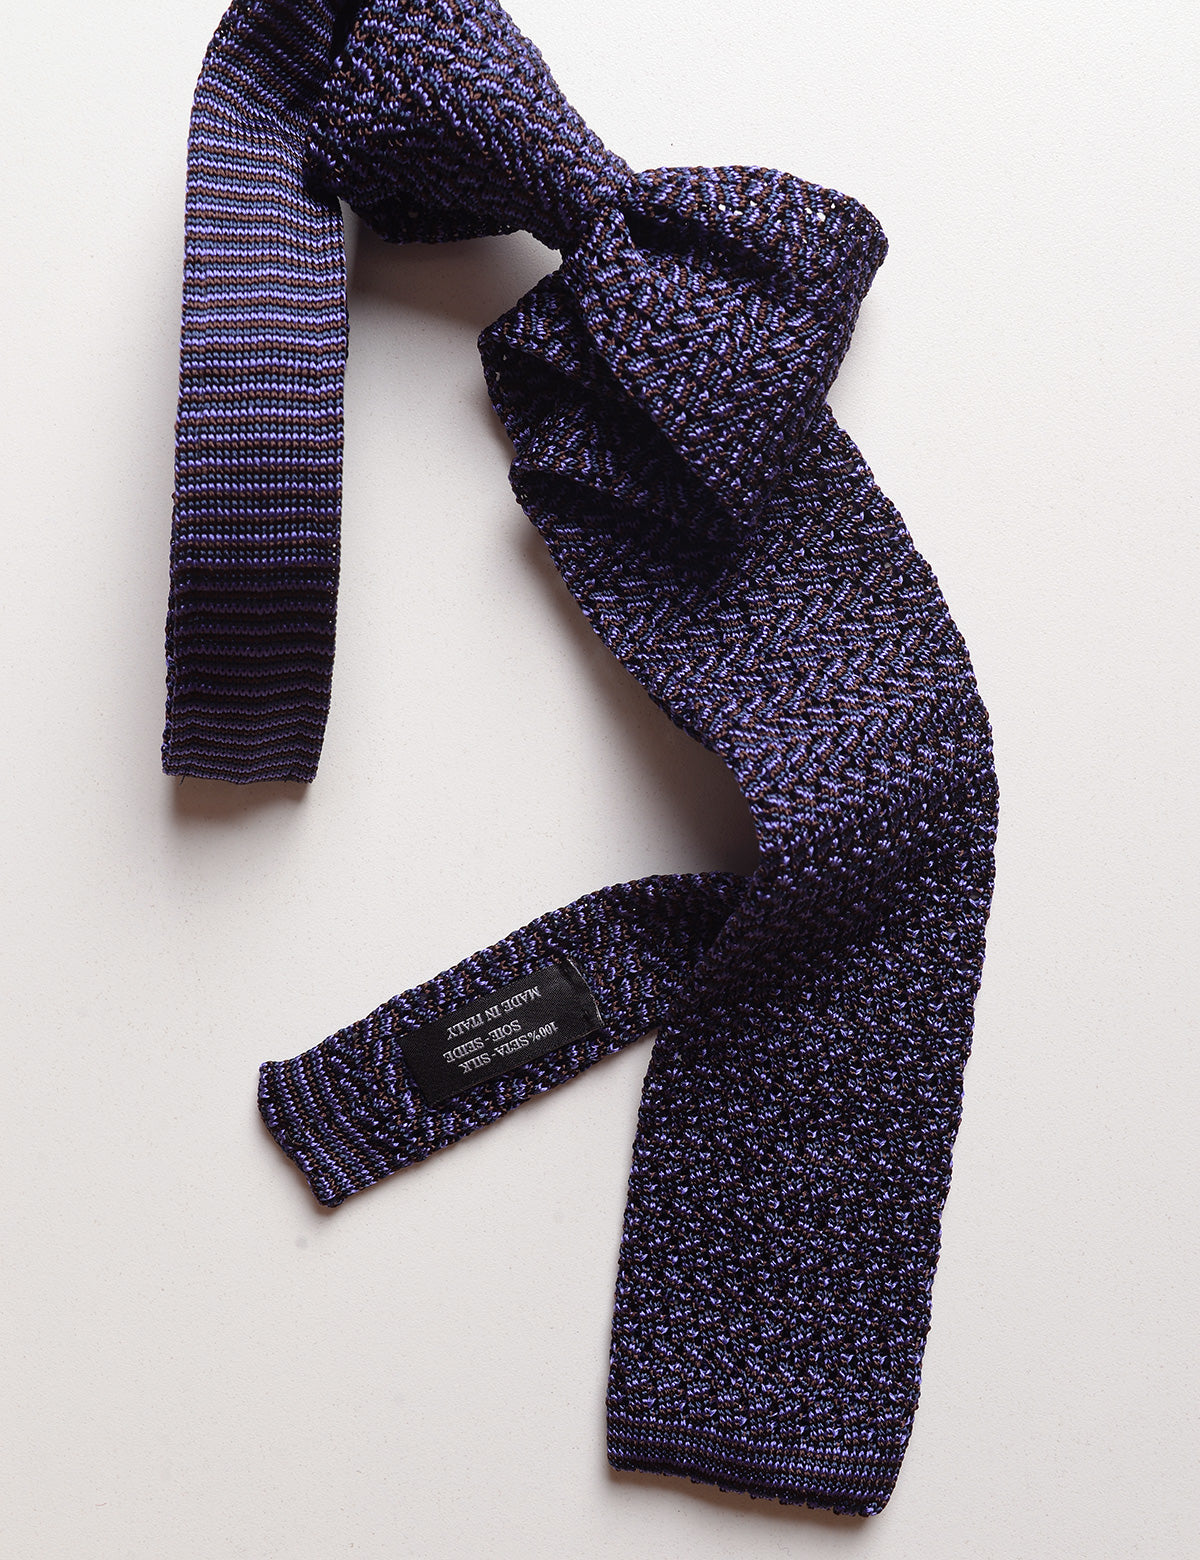 Knit and label detail of Micro Pattern Silk Knit Tie - Amethyst